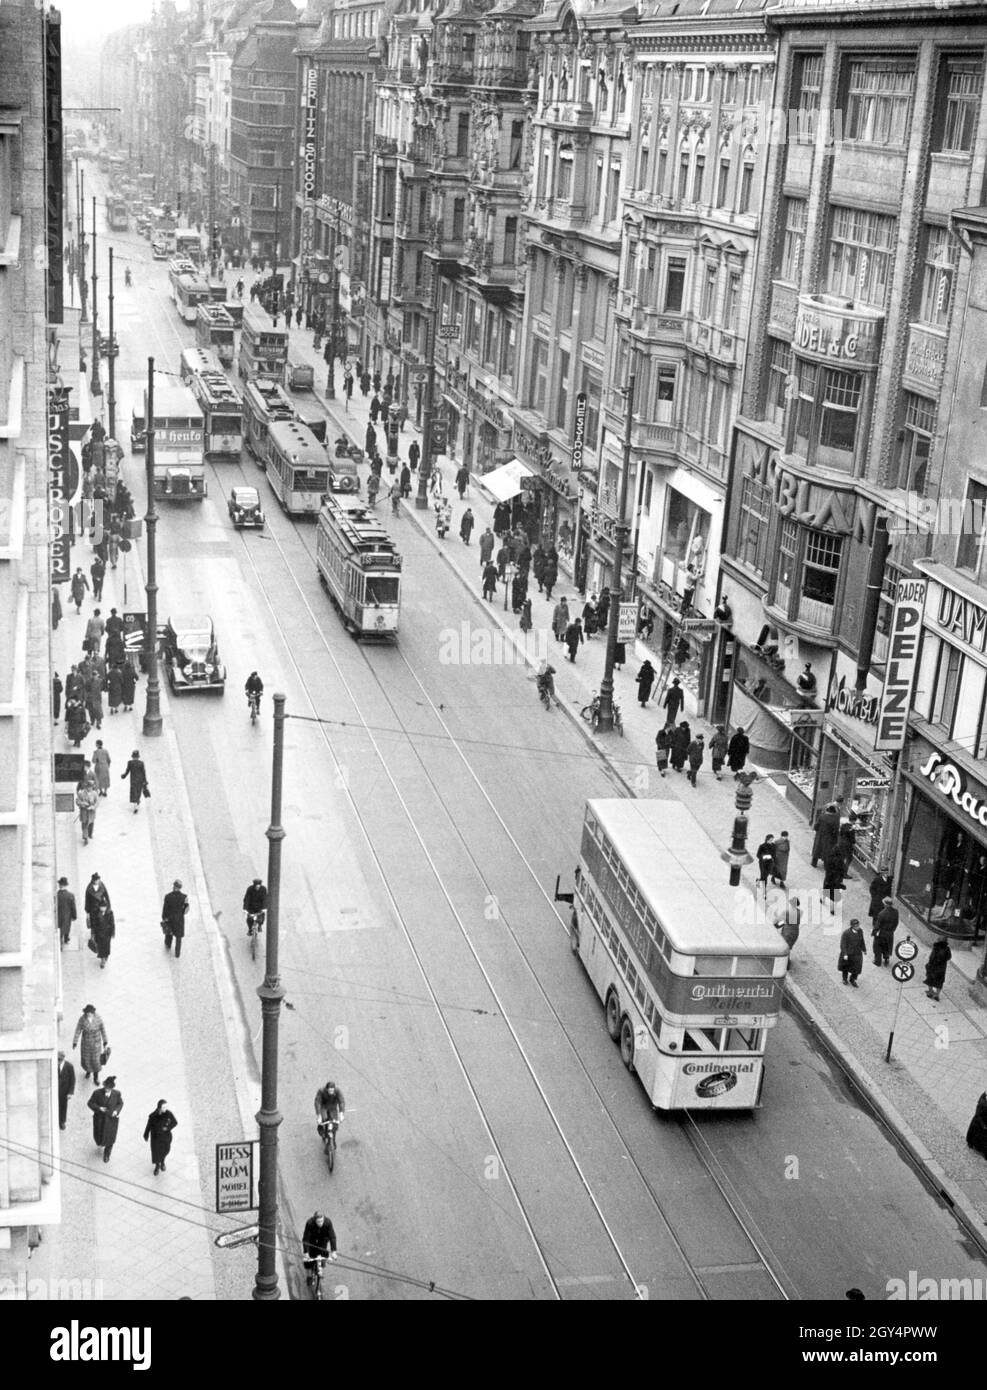 'Buses and trams drive on Leipziger Strasse in Berlin-Mitte on January 25, 1938. The front bus advertises ''Continental tires''. The view is from Friedrichstraße in the direction of Mauerstraße and Leipziger Platz. The street is lined with shops, including ''S. Rader Pelze'', ''Montblanc'', ''Hess und Rom Möbel'', a perfumery, ''Herz Röcke'', a ''Berlitz School'' (right side of the street) and a ''J. Schröder'' shop next to the Hotel Kempinski (left side of the street). [automated translation]' Stock Photo